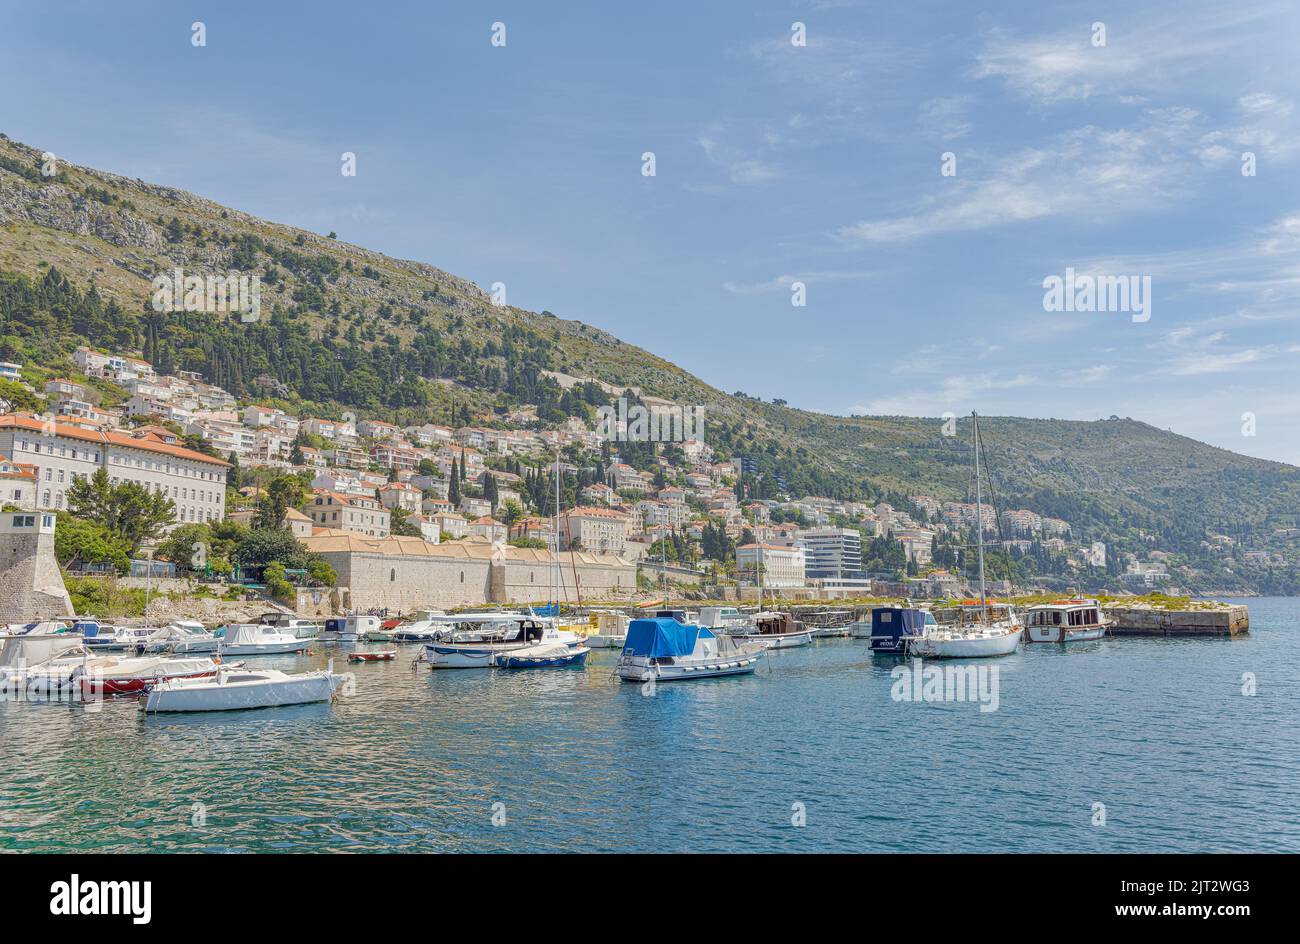 Dubrovnik old town harbor atmosphere with local small boats moored Stock Photo